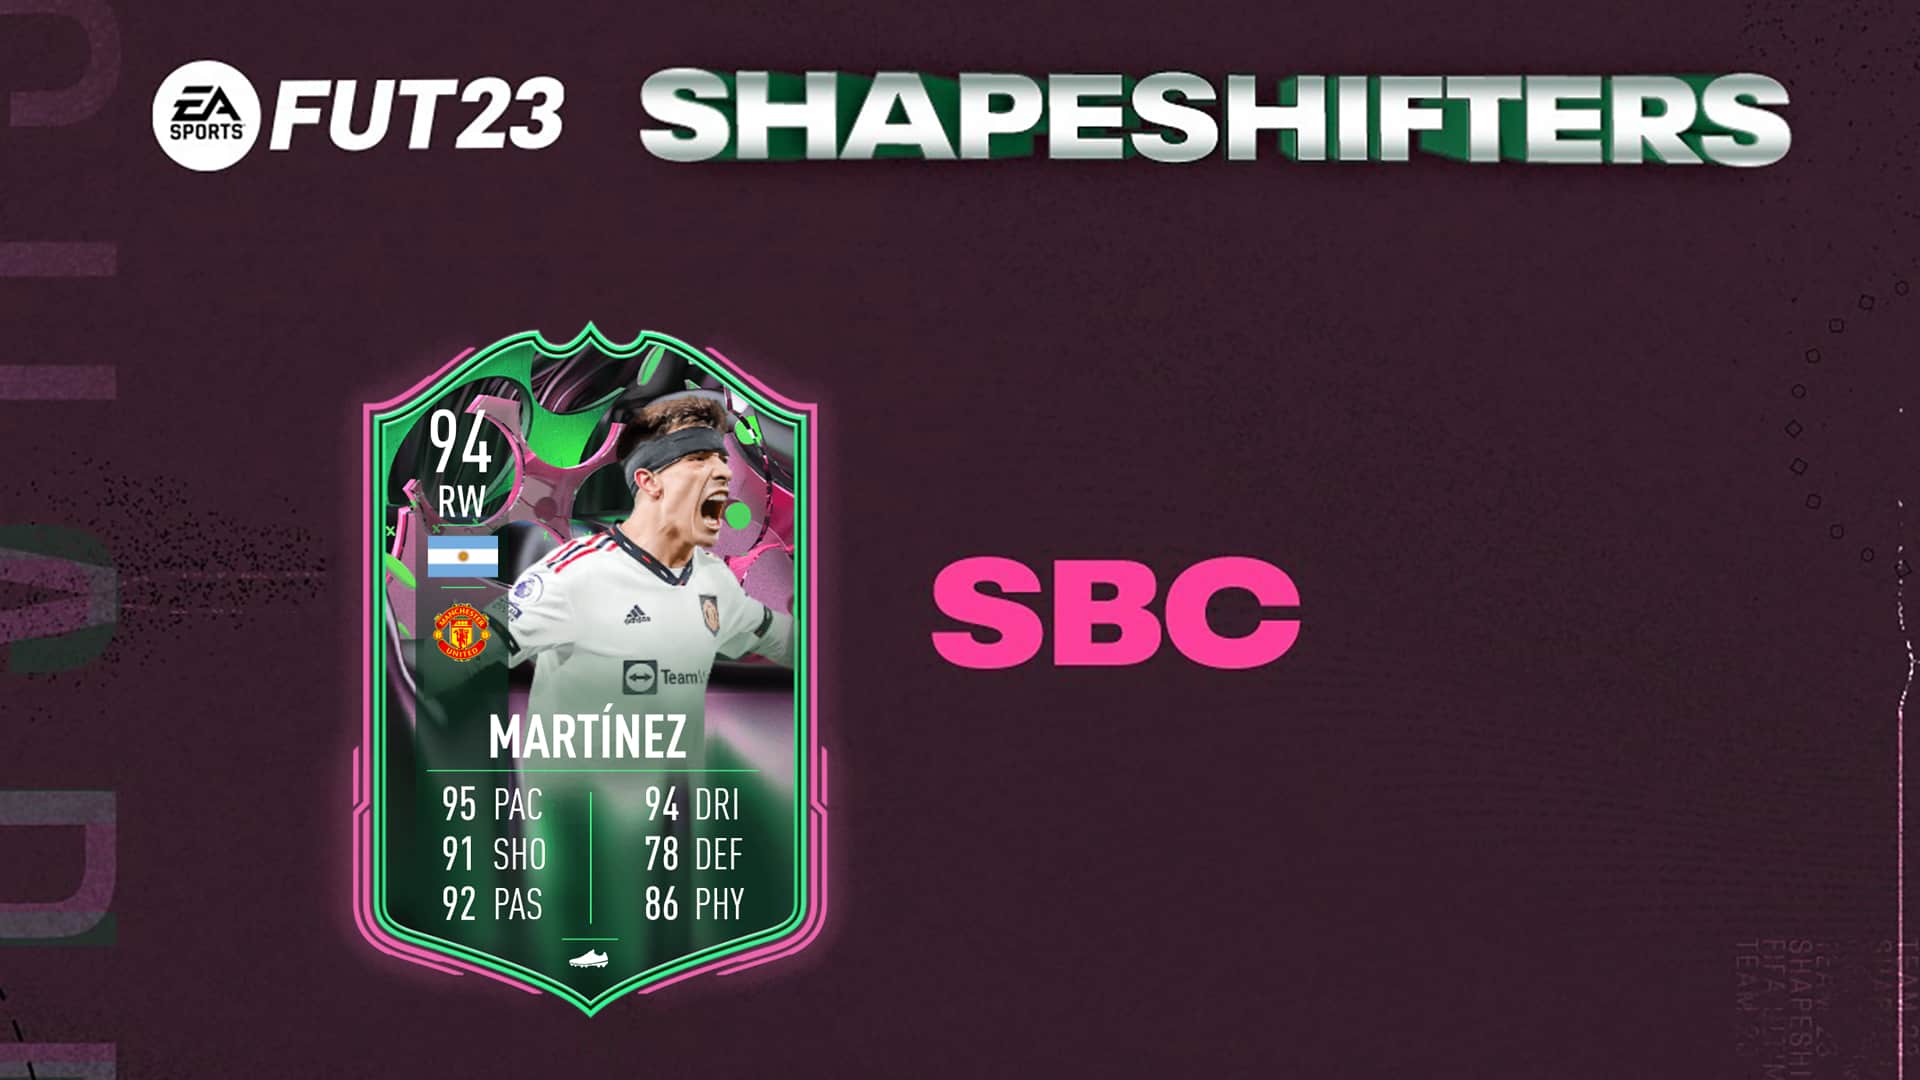 FUT Sheriff - Shapeshifters is the next promo to be released in